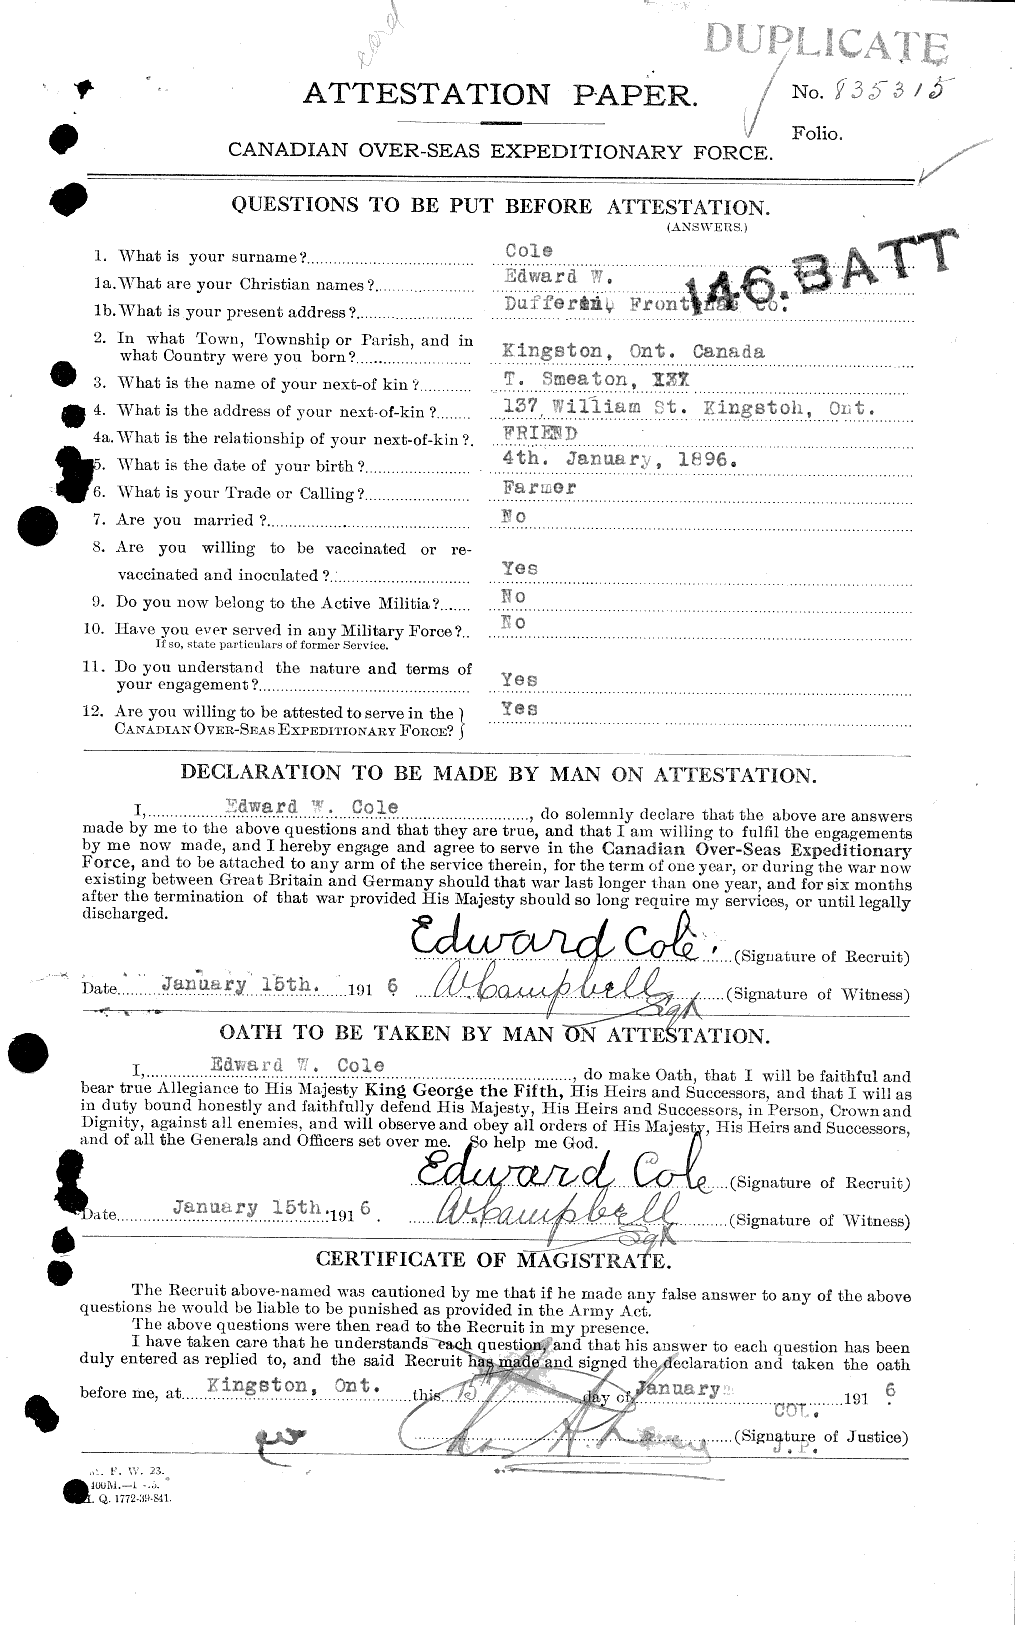 Personnel Records of the First World War - CEF 027683a